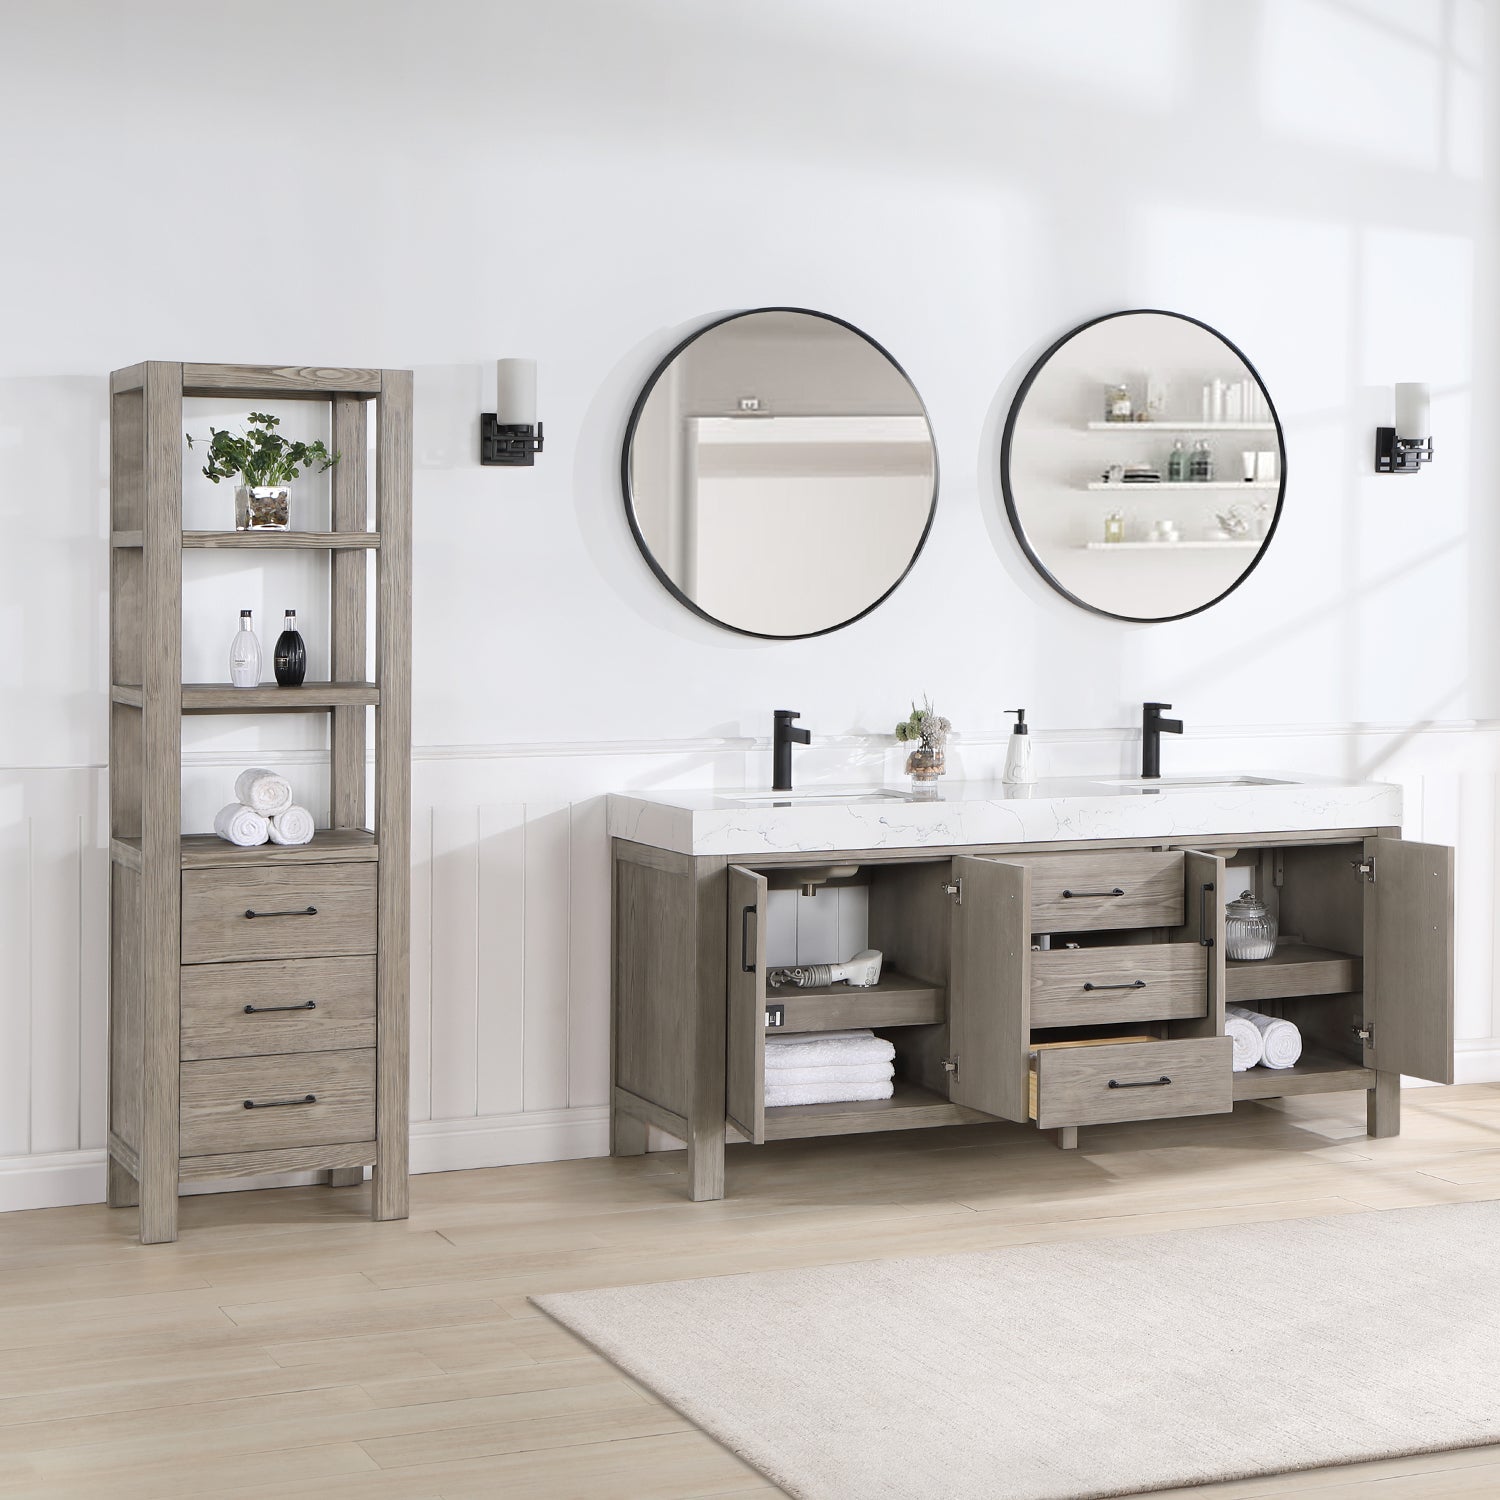 Vinnova Design León 72in. Free standing Double Bathroom Vanity in Fir Wood Grey with Composite top in Lightning White - New Star Living